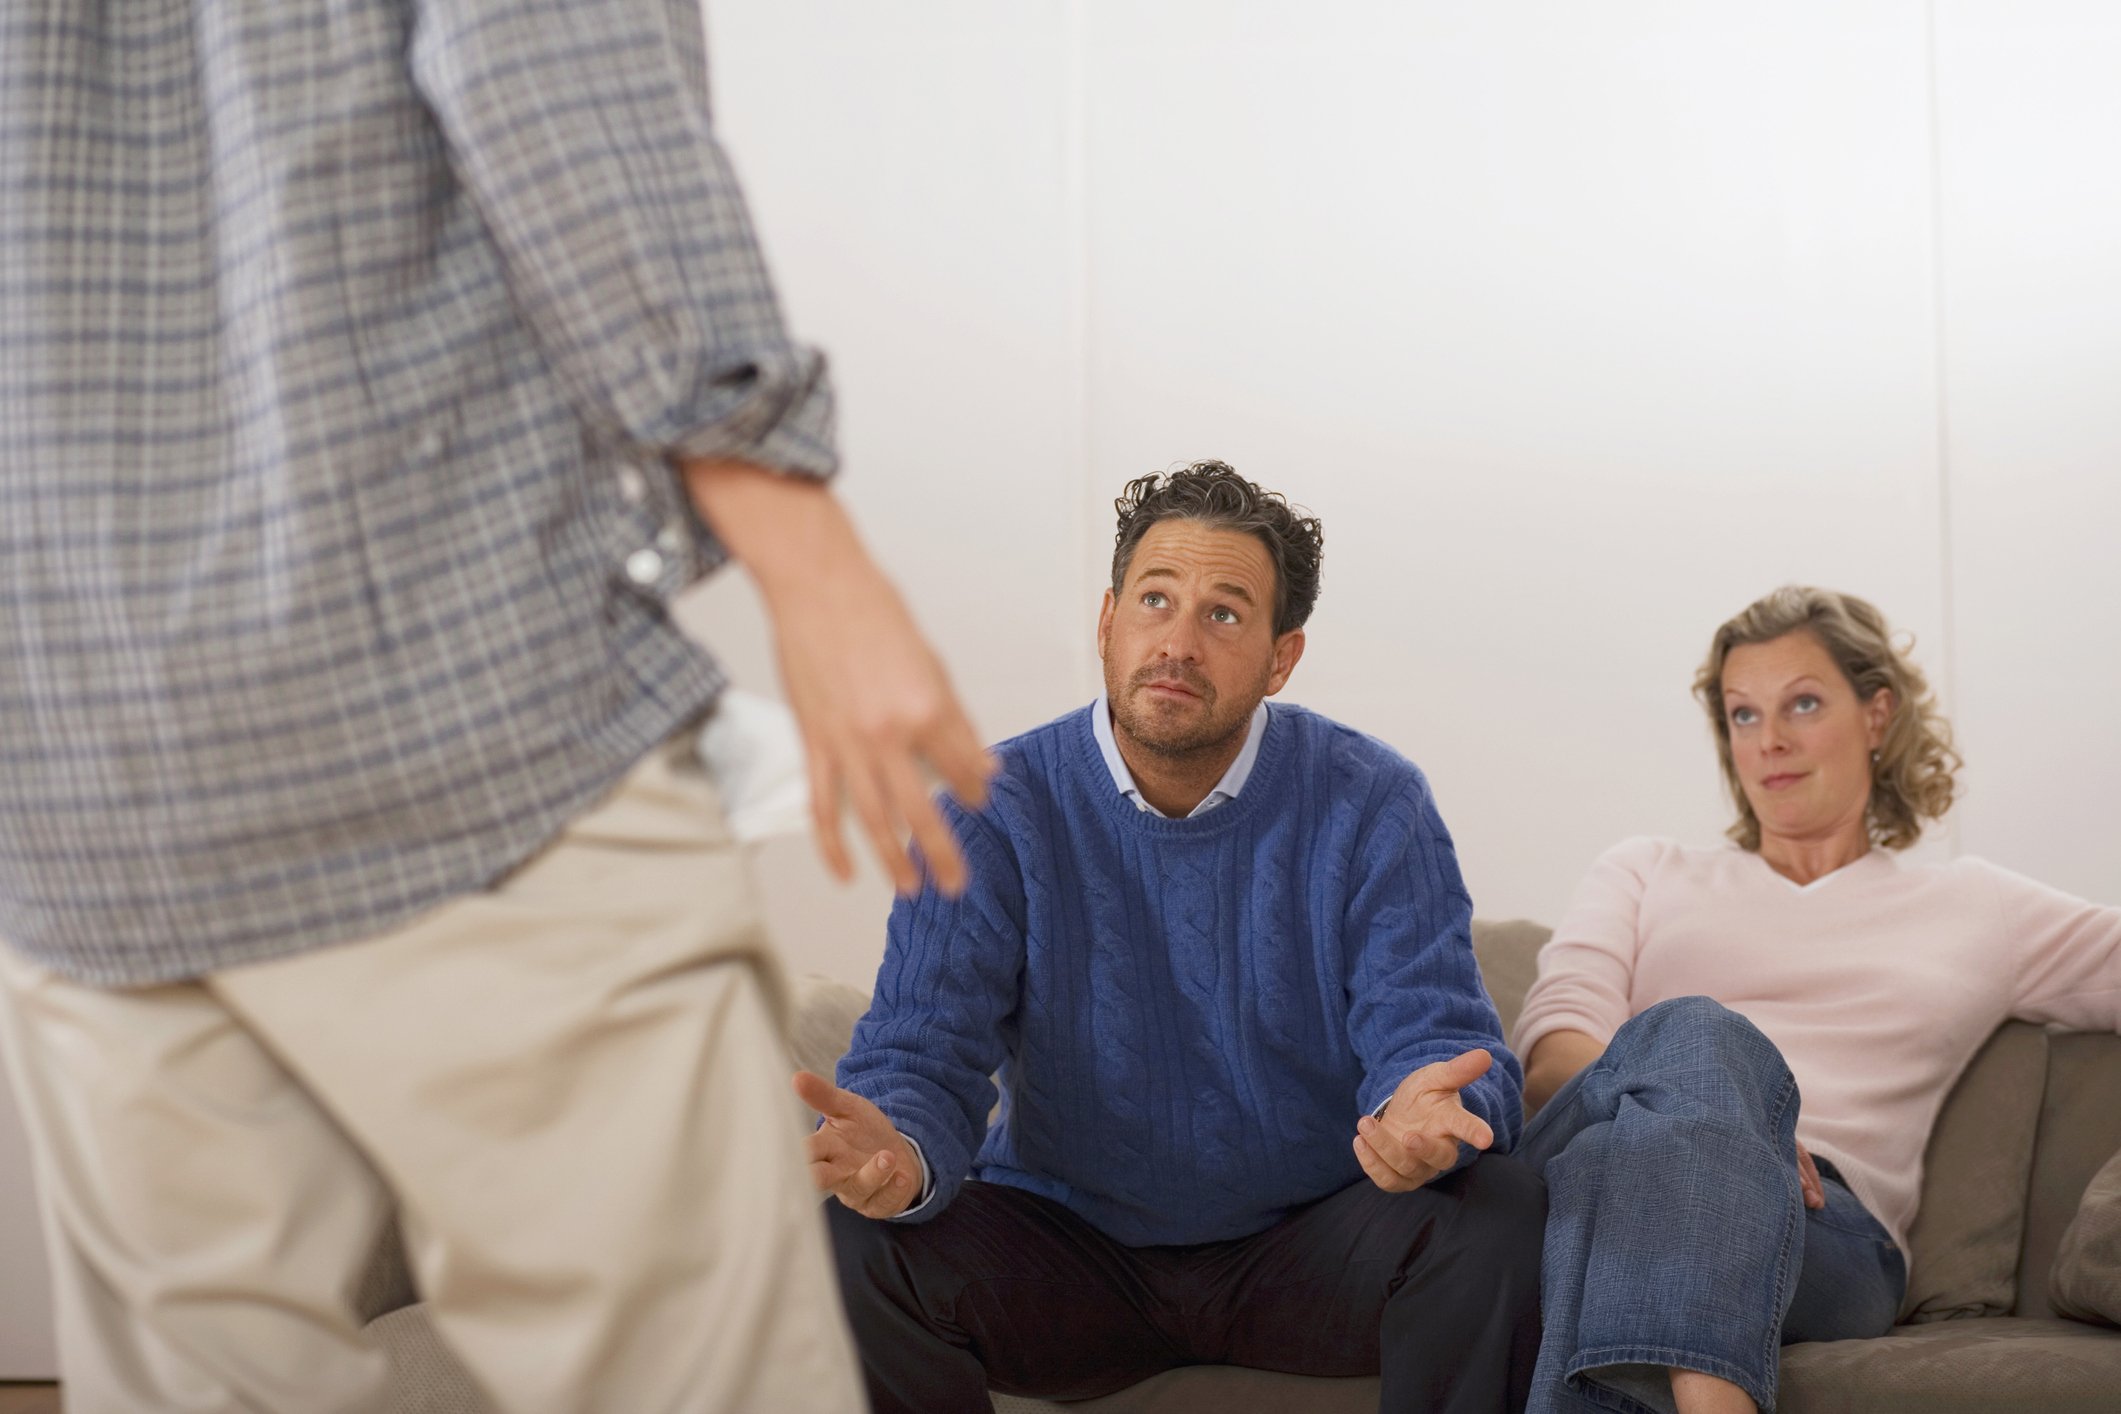 Son argues with parents. | Photo: Getty Images